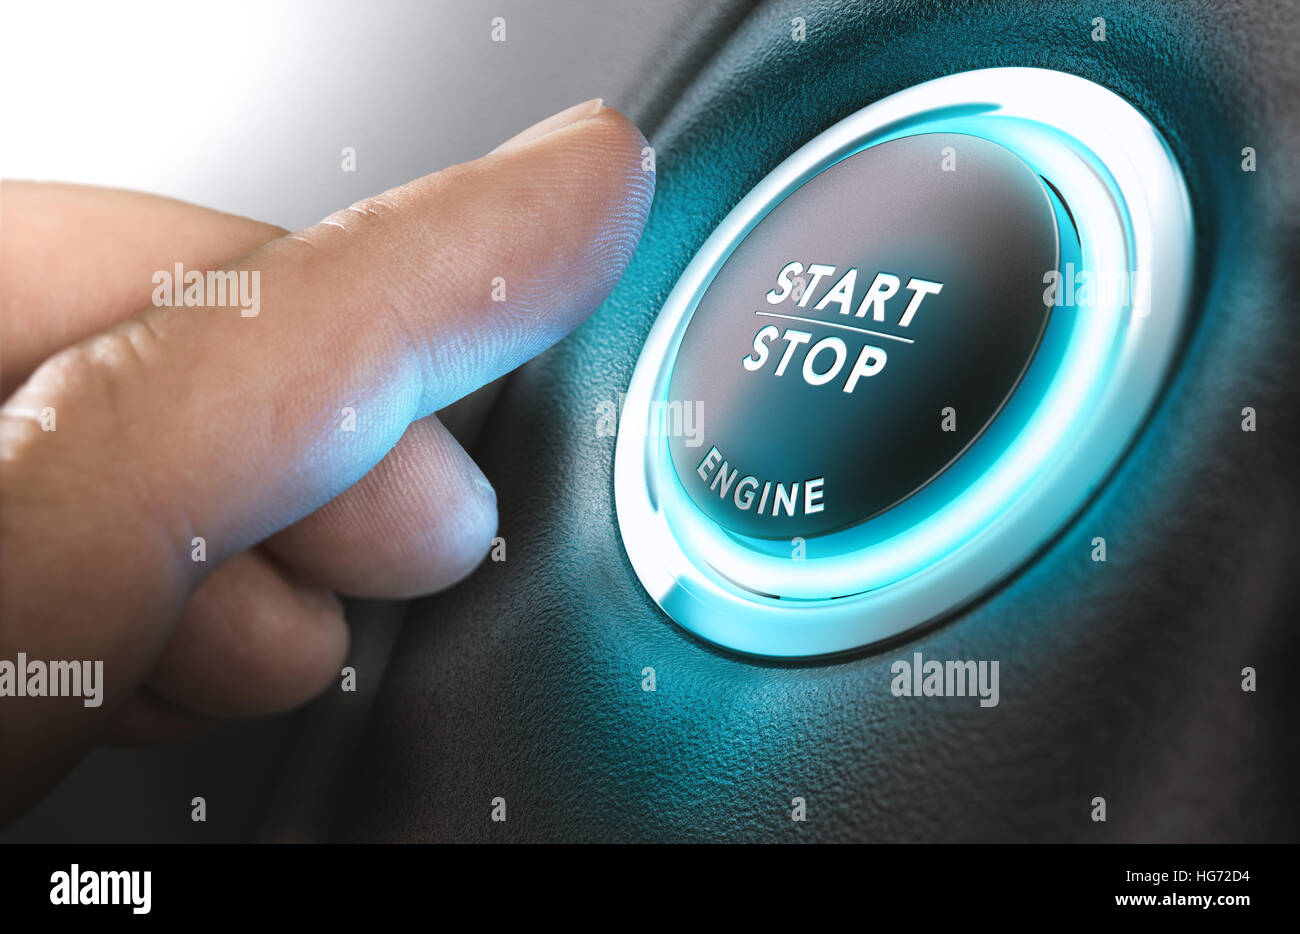 Car stop start system with finger pressing the button, horizontal image Stock Photo